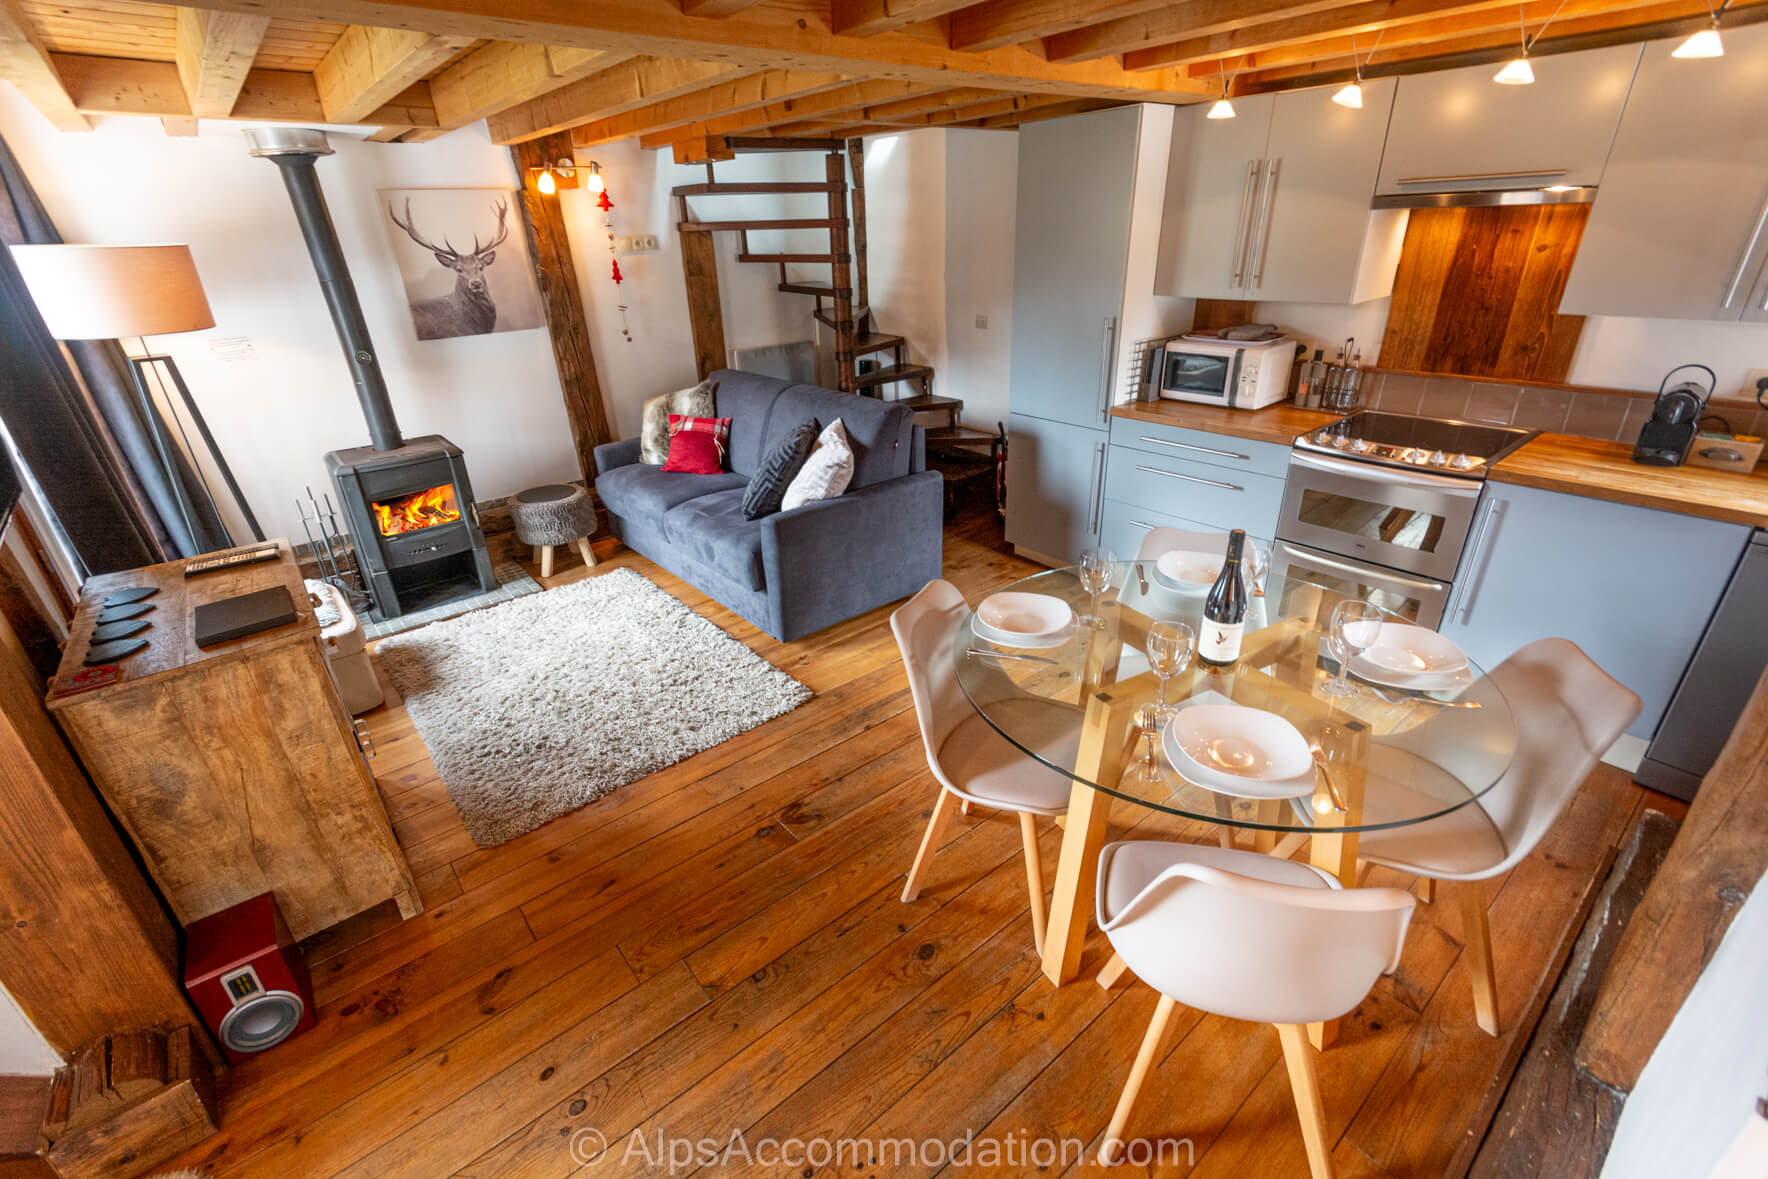 The Mazot Samoëns - Beautiful open plan living kitchen and dining areas with log burner